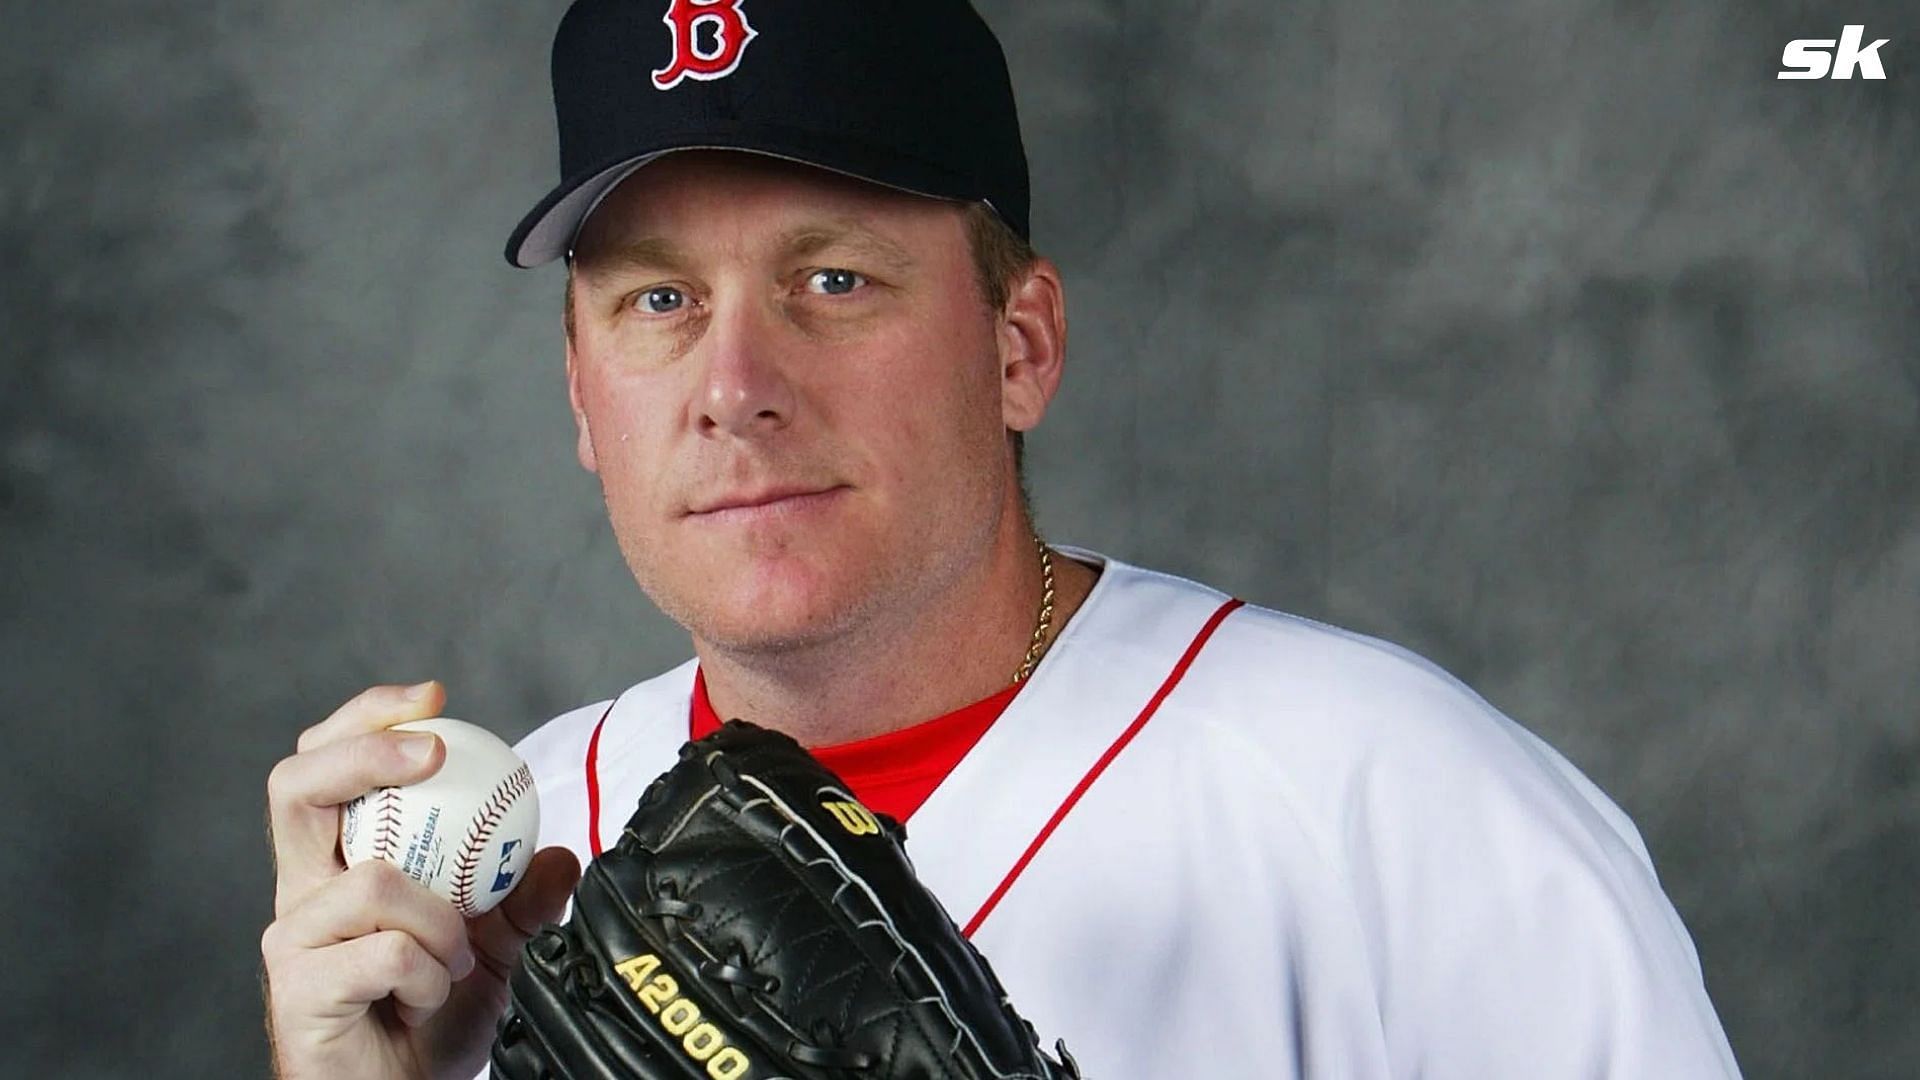 Red Sox Photo Day FT. MYERS, FL - FEBRUARY 28: Curt Schilling #38 of the Boston Red Sox poses for a portrait during Photo Day at their spring training facility on February 28, 2004 in Ft. Myers, Florida. (Photo by Jed Jacobsohn/Getty Images)